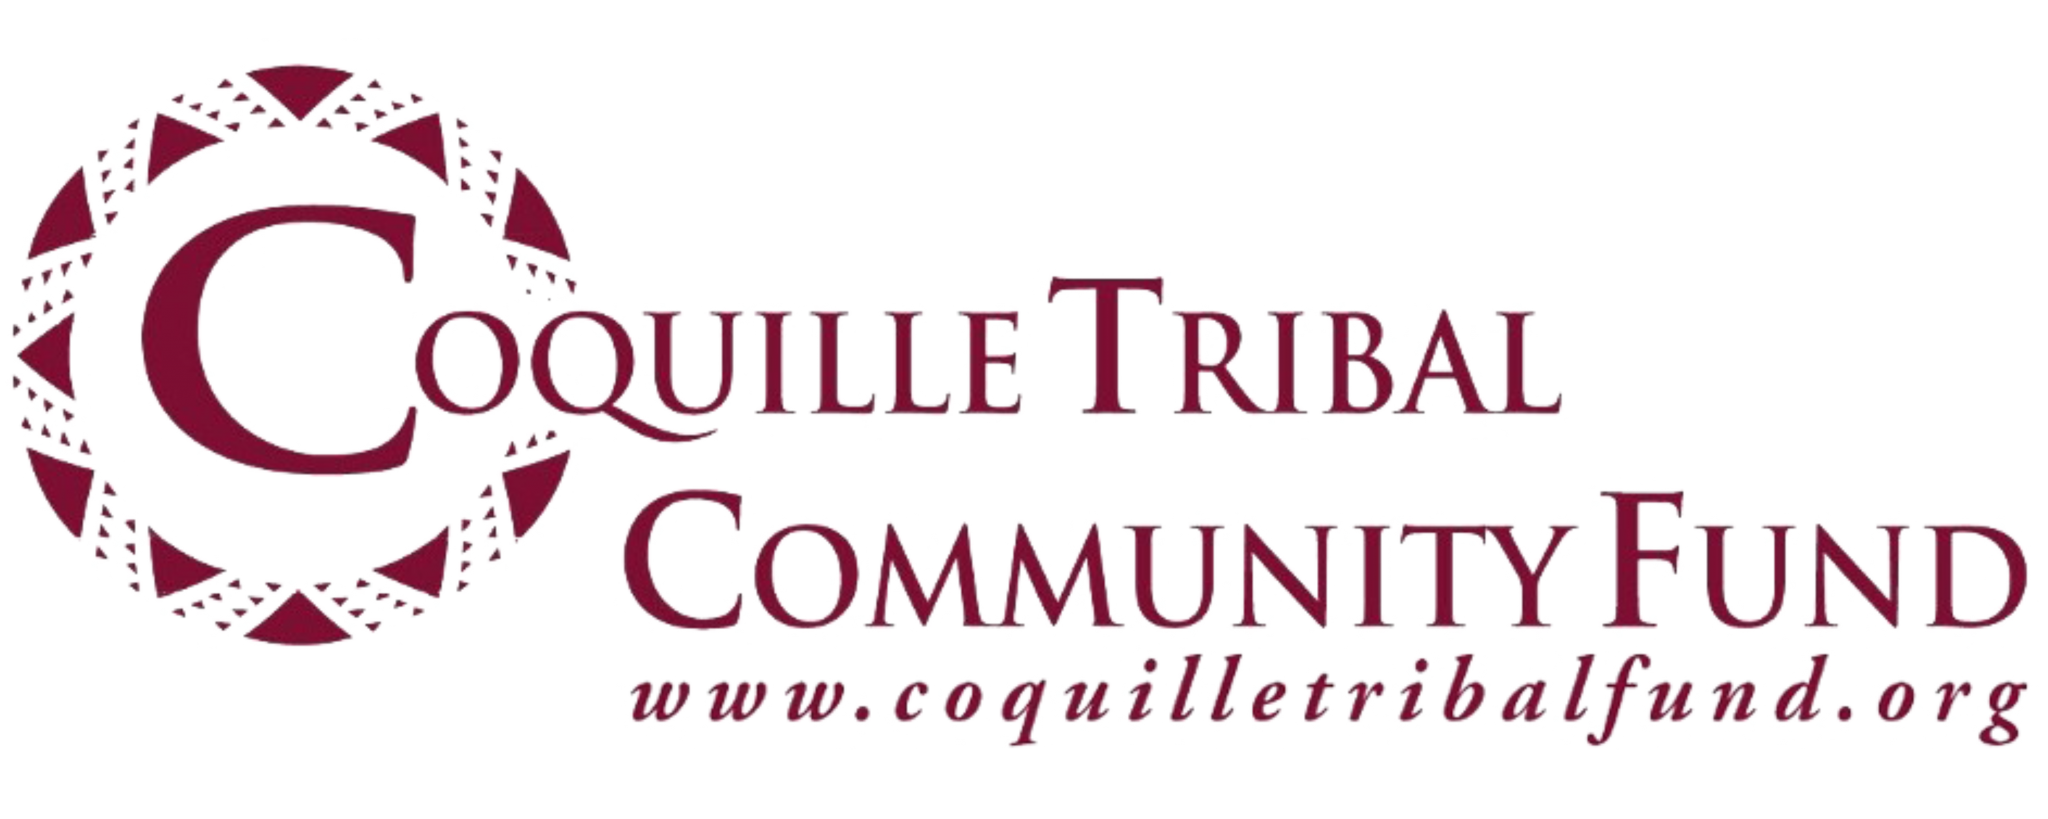 coquille tribe medford casino channel 12 news